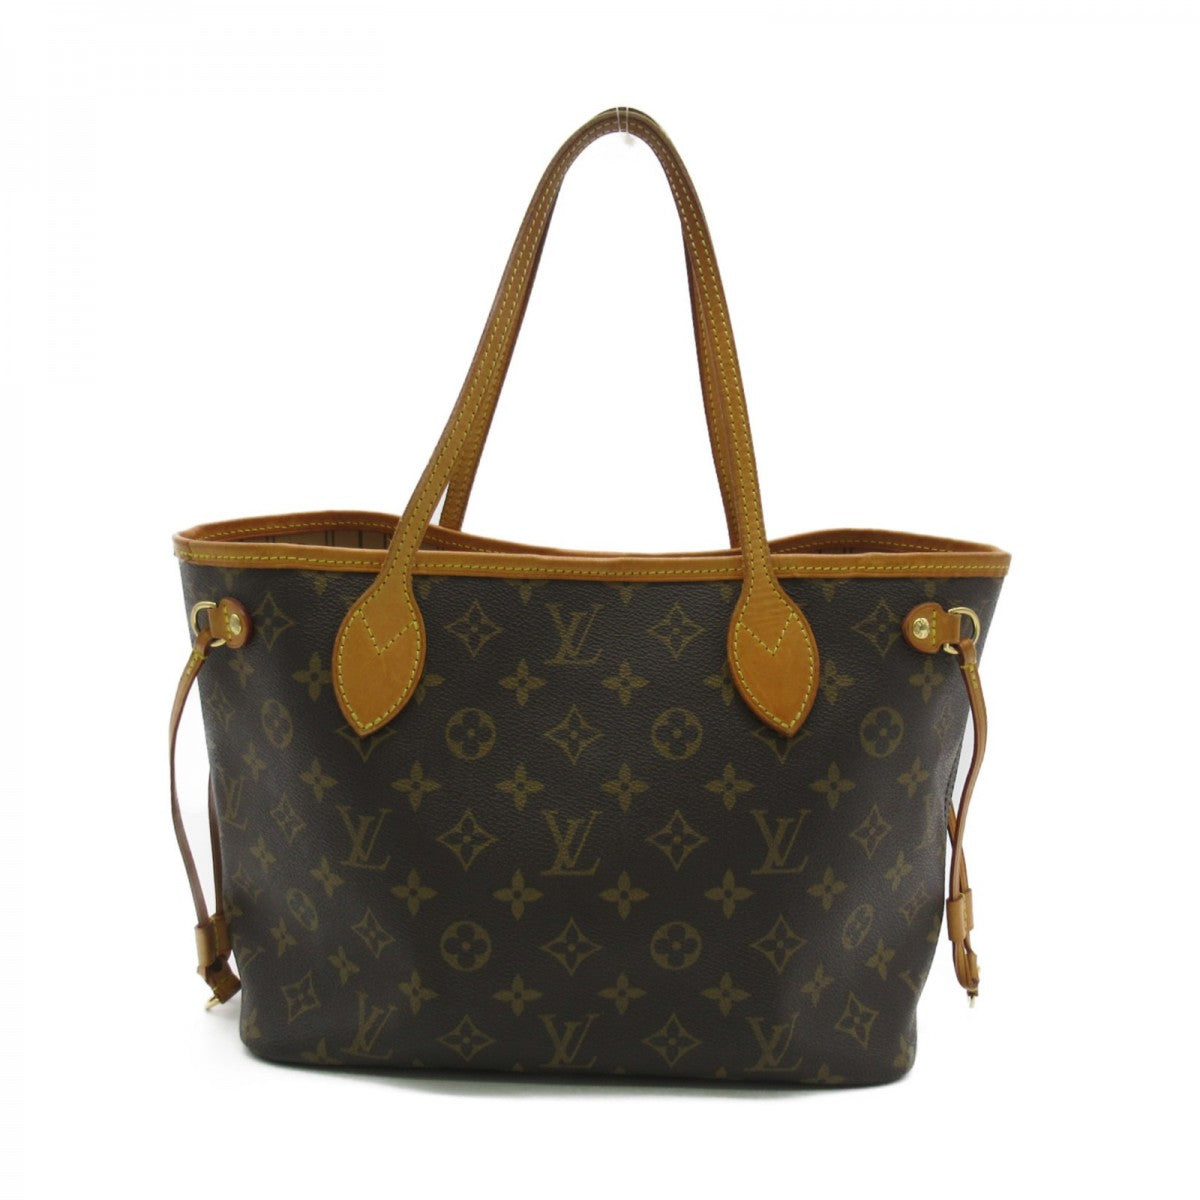 Louis Vuitton Monogram Neverfull PM Canvas Tote Bag M40155 in Good condition